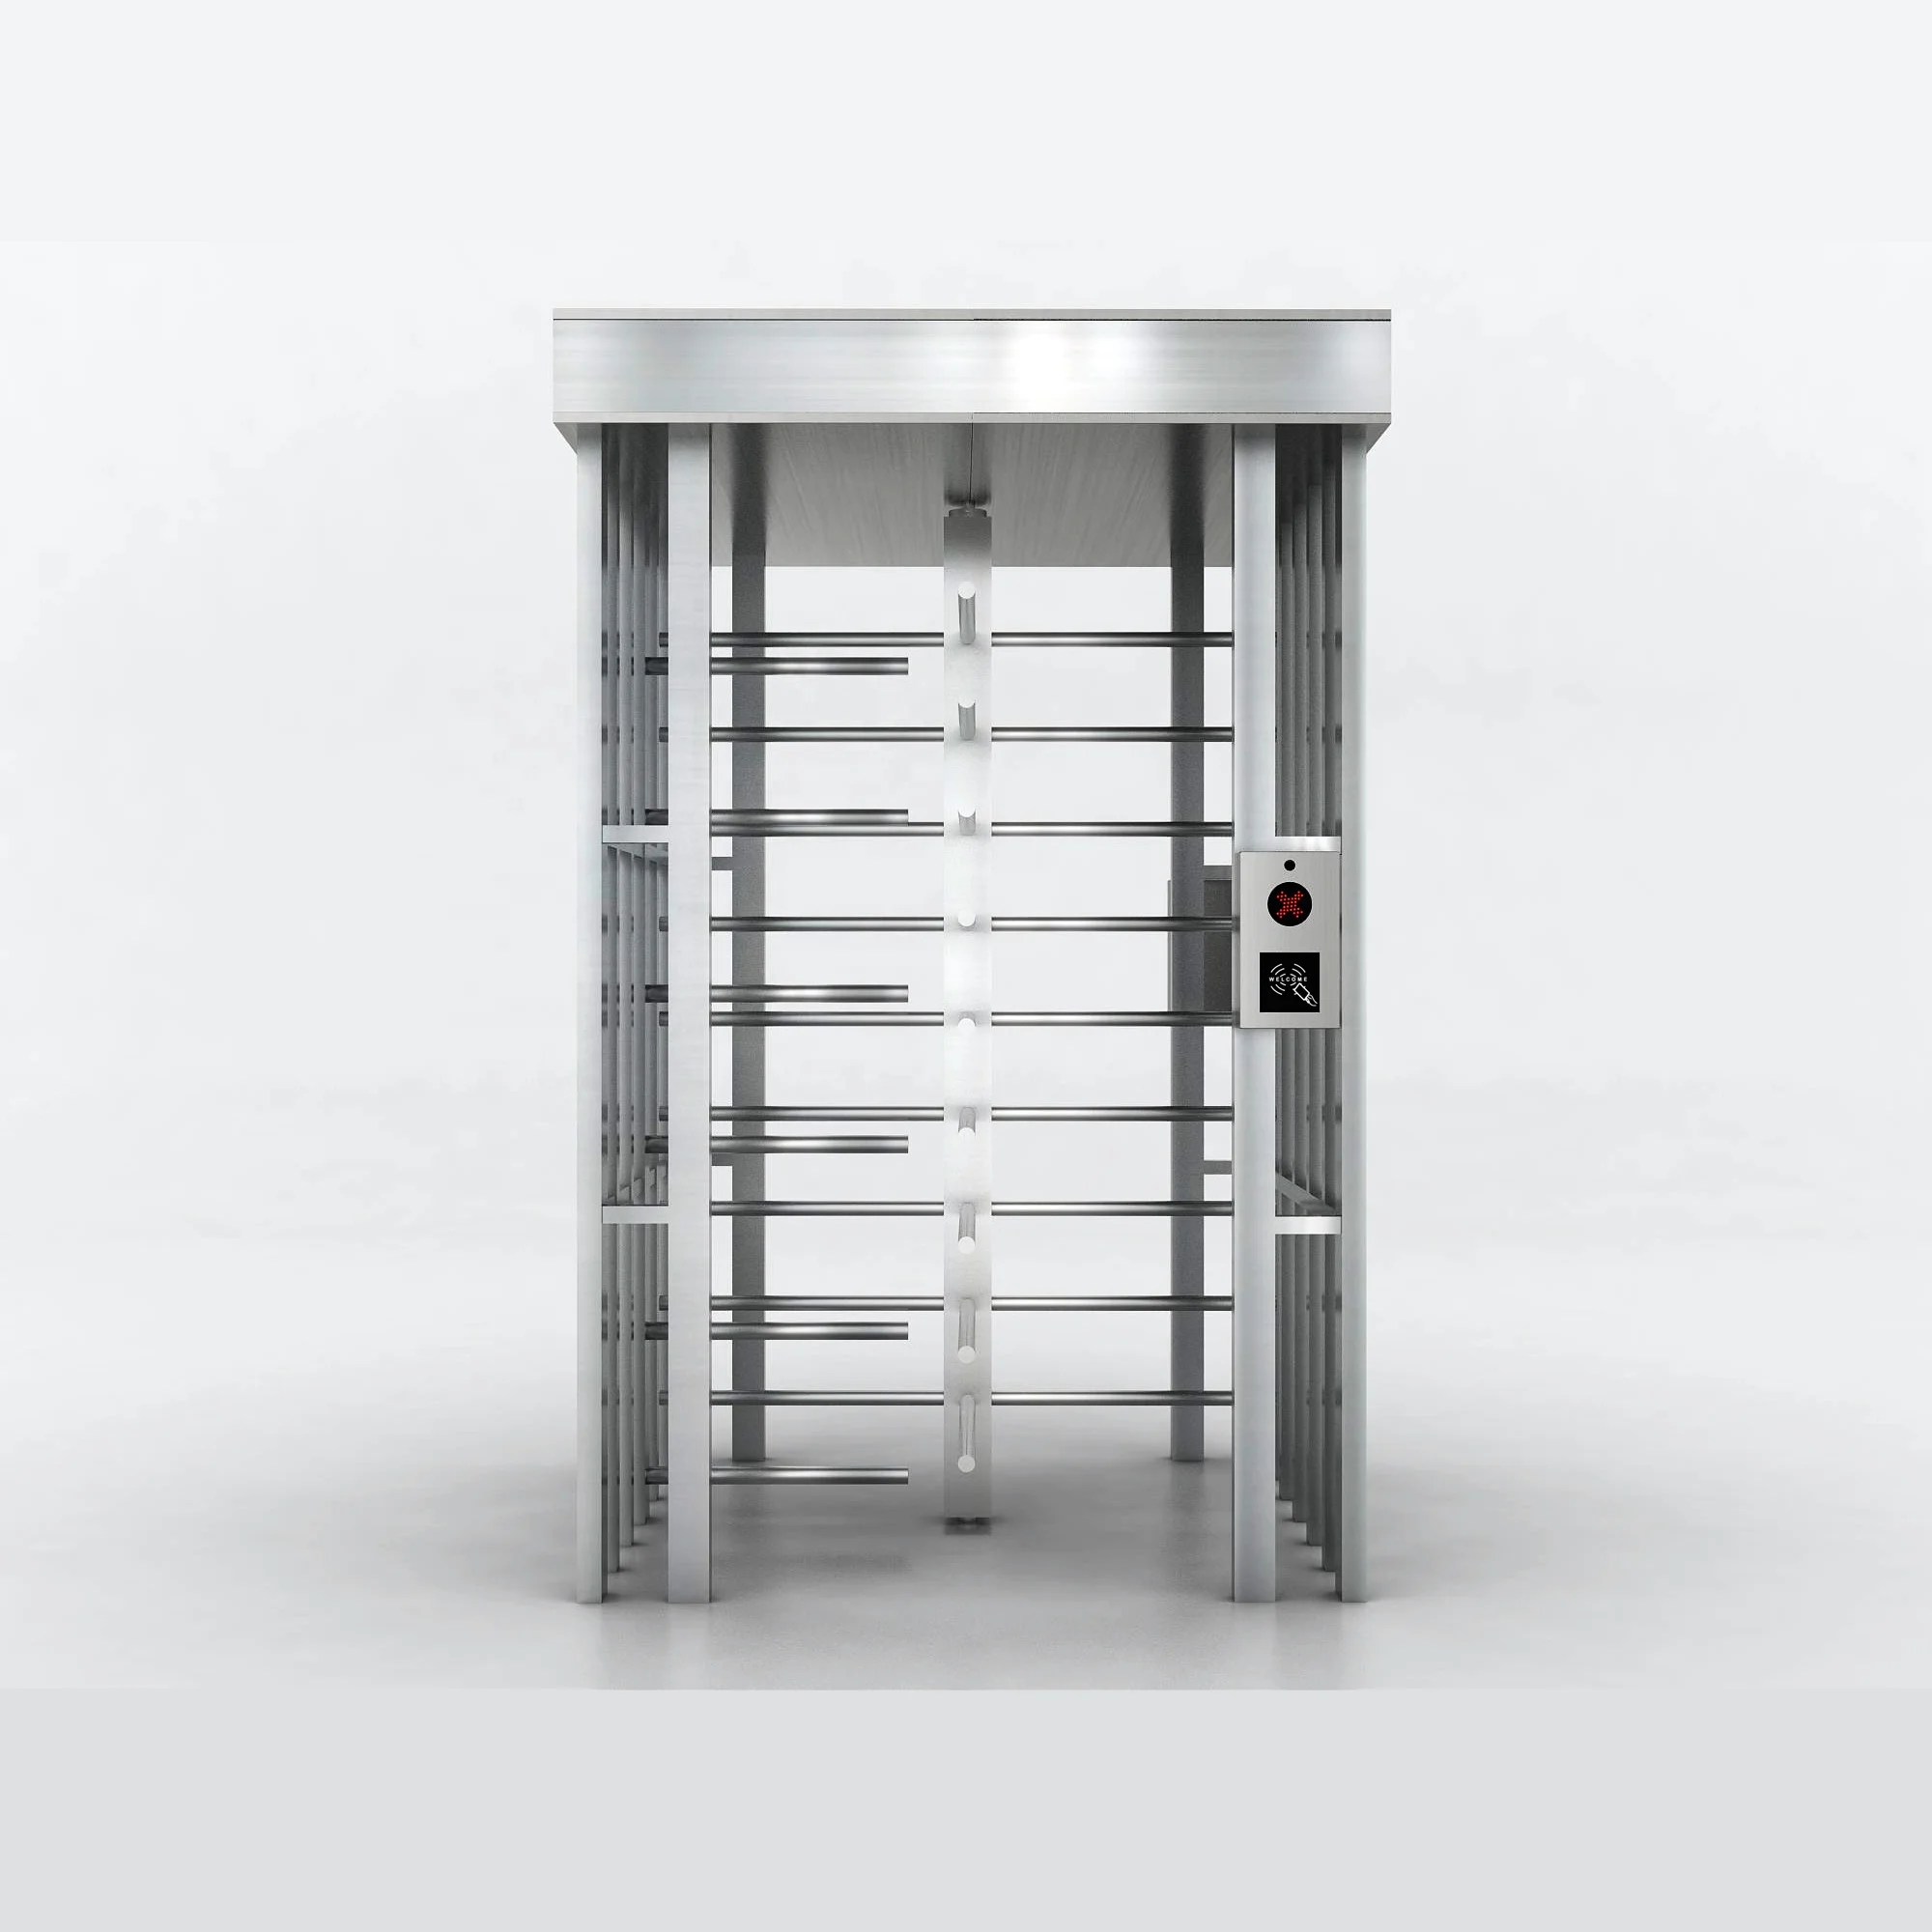 

Full height electric tripod turnstile system barrier gate for public place